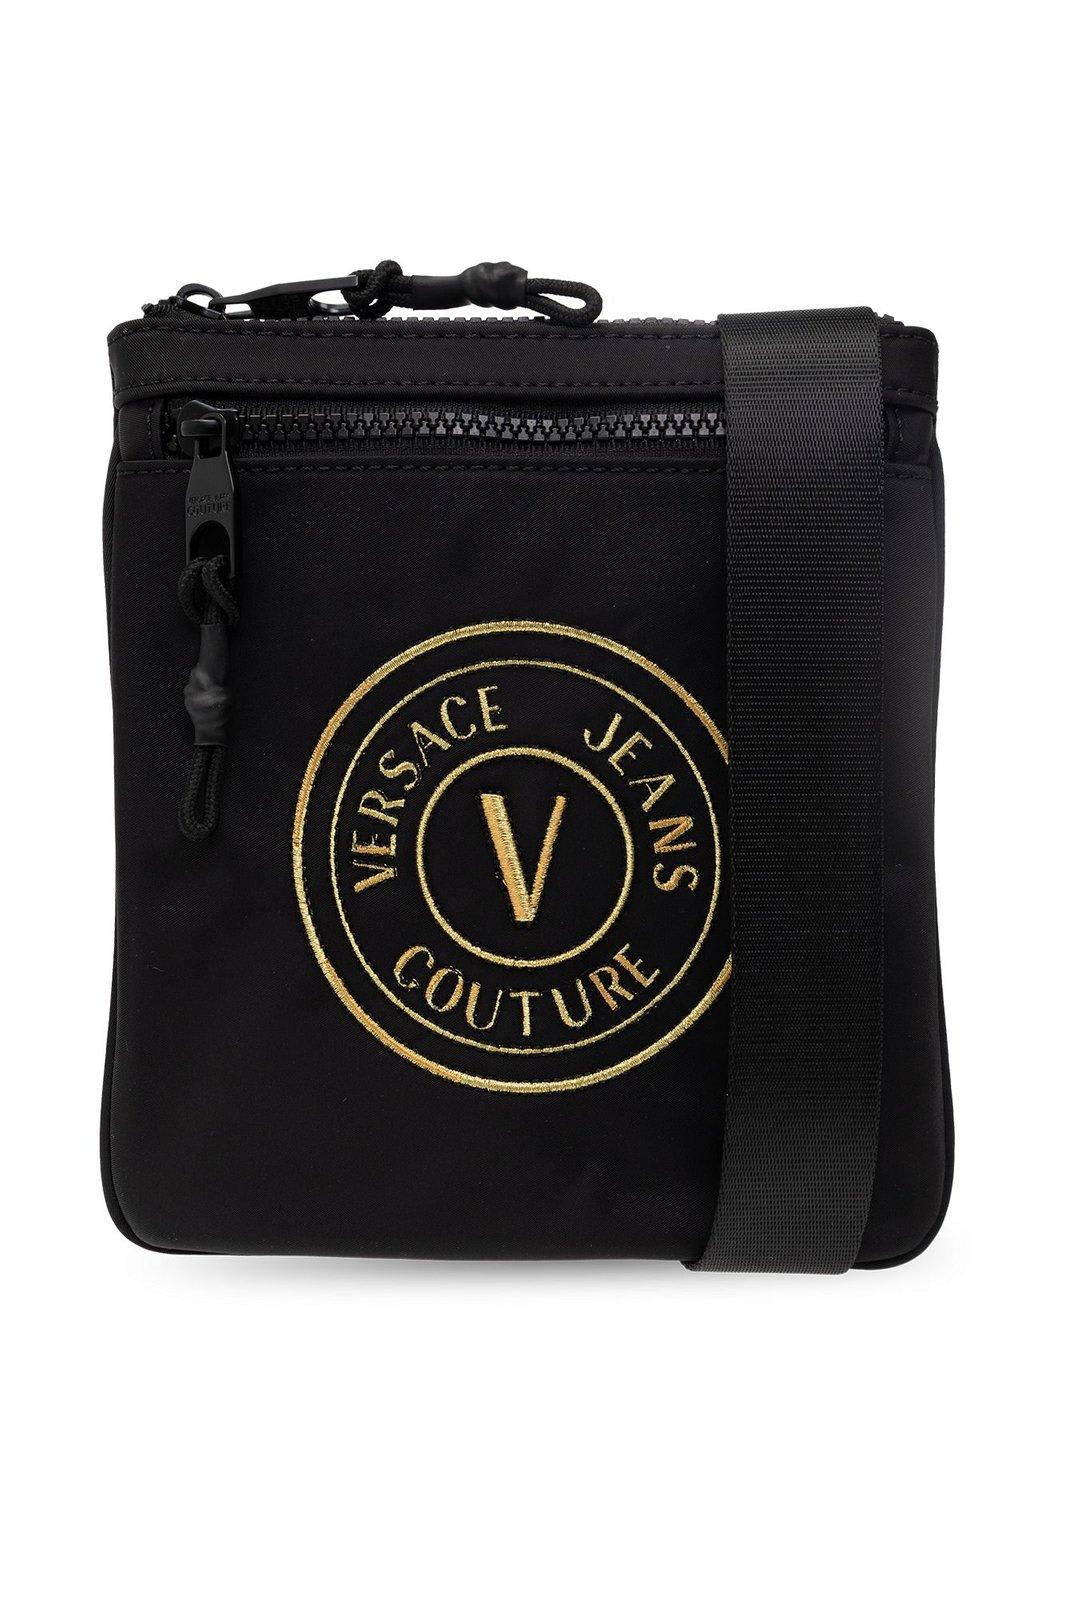 VERSACE JEANS COUTURE LOGO EMBROIDERED ZIPPED MESSENGER BAG